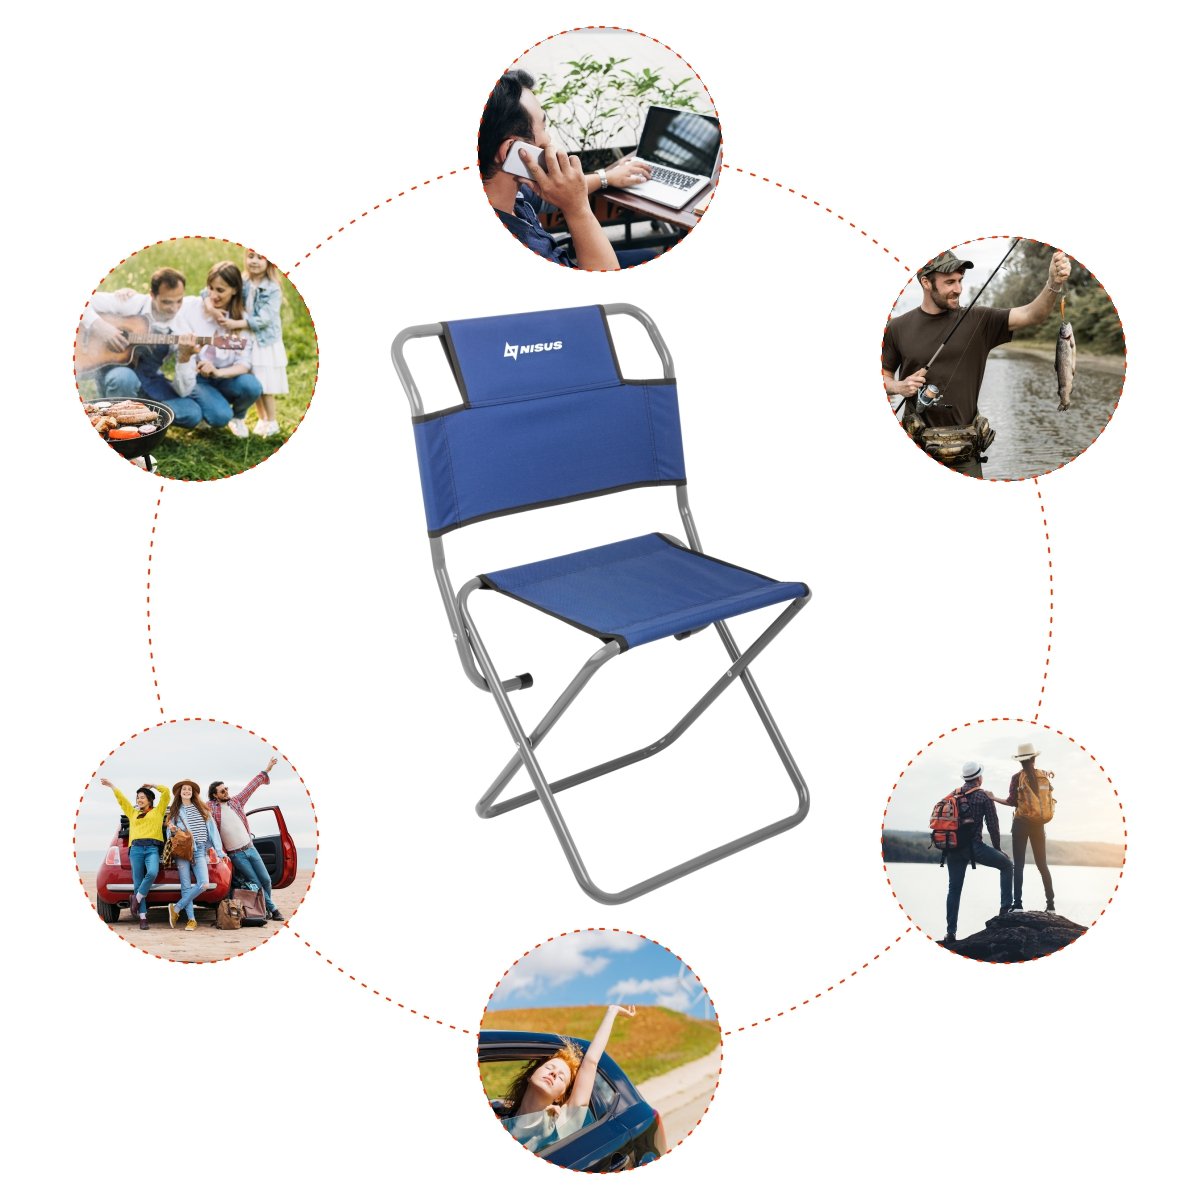 Nisus Blue Folding Chair with back support where could be used infographics